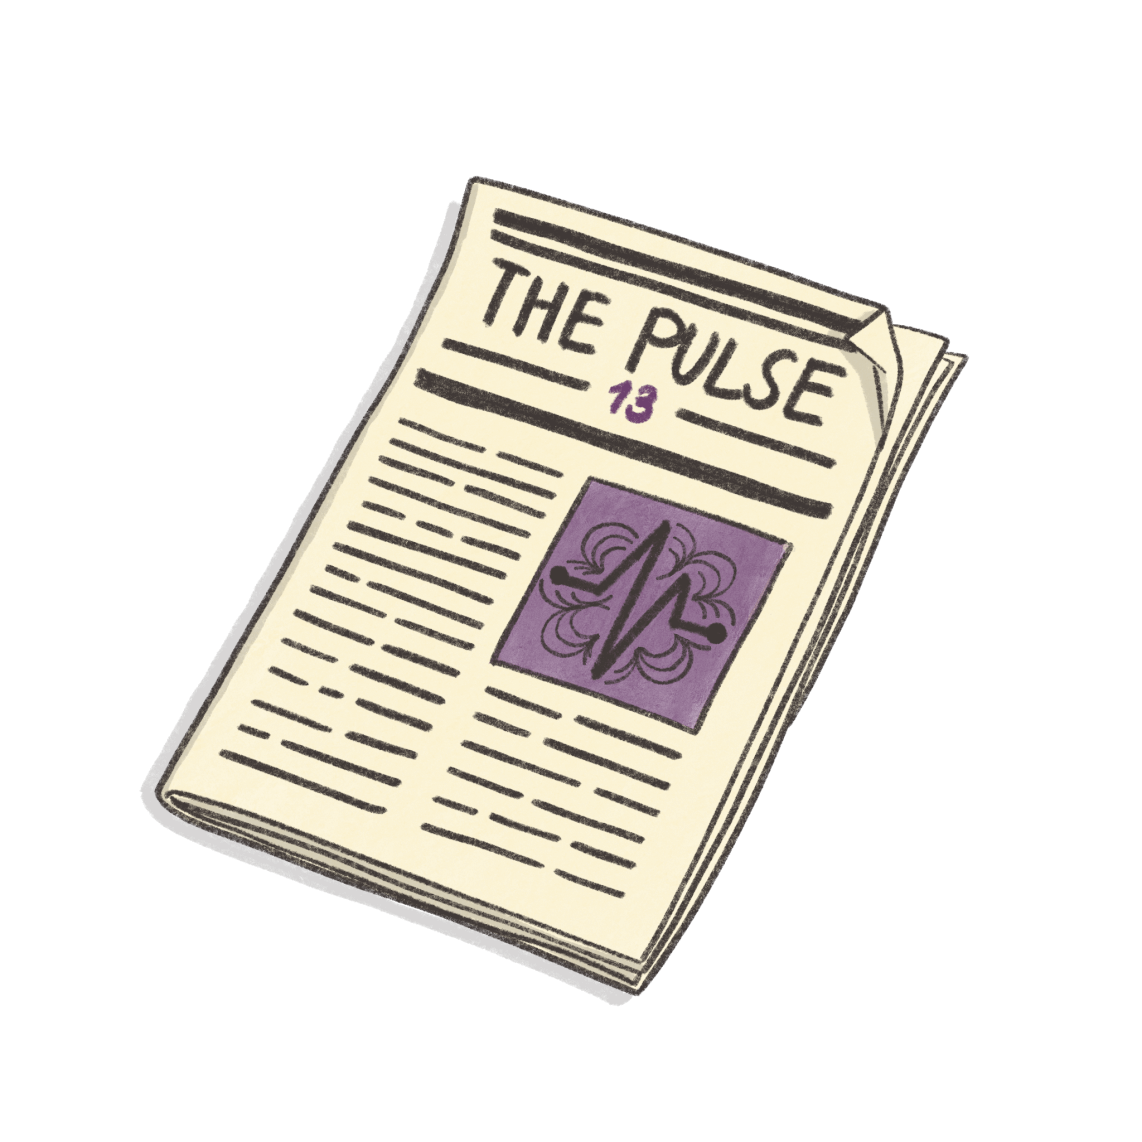 The Apoio Pulse – Issue 13 image